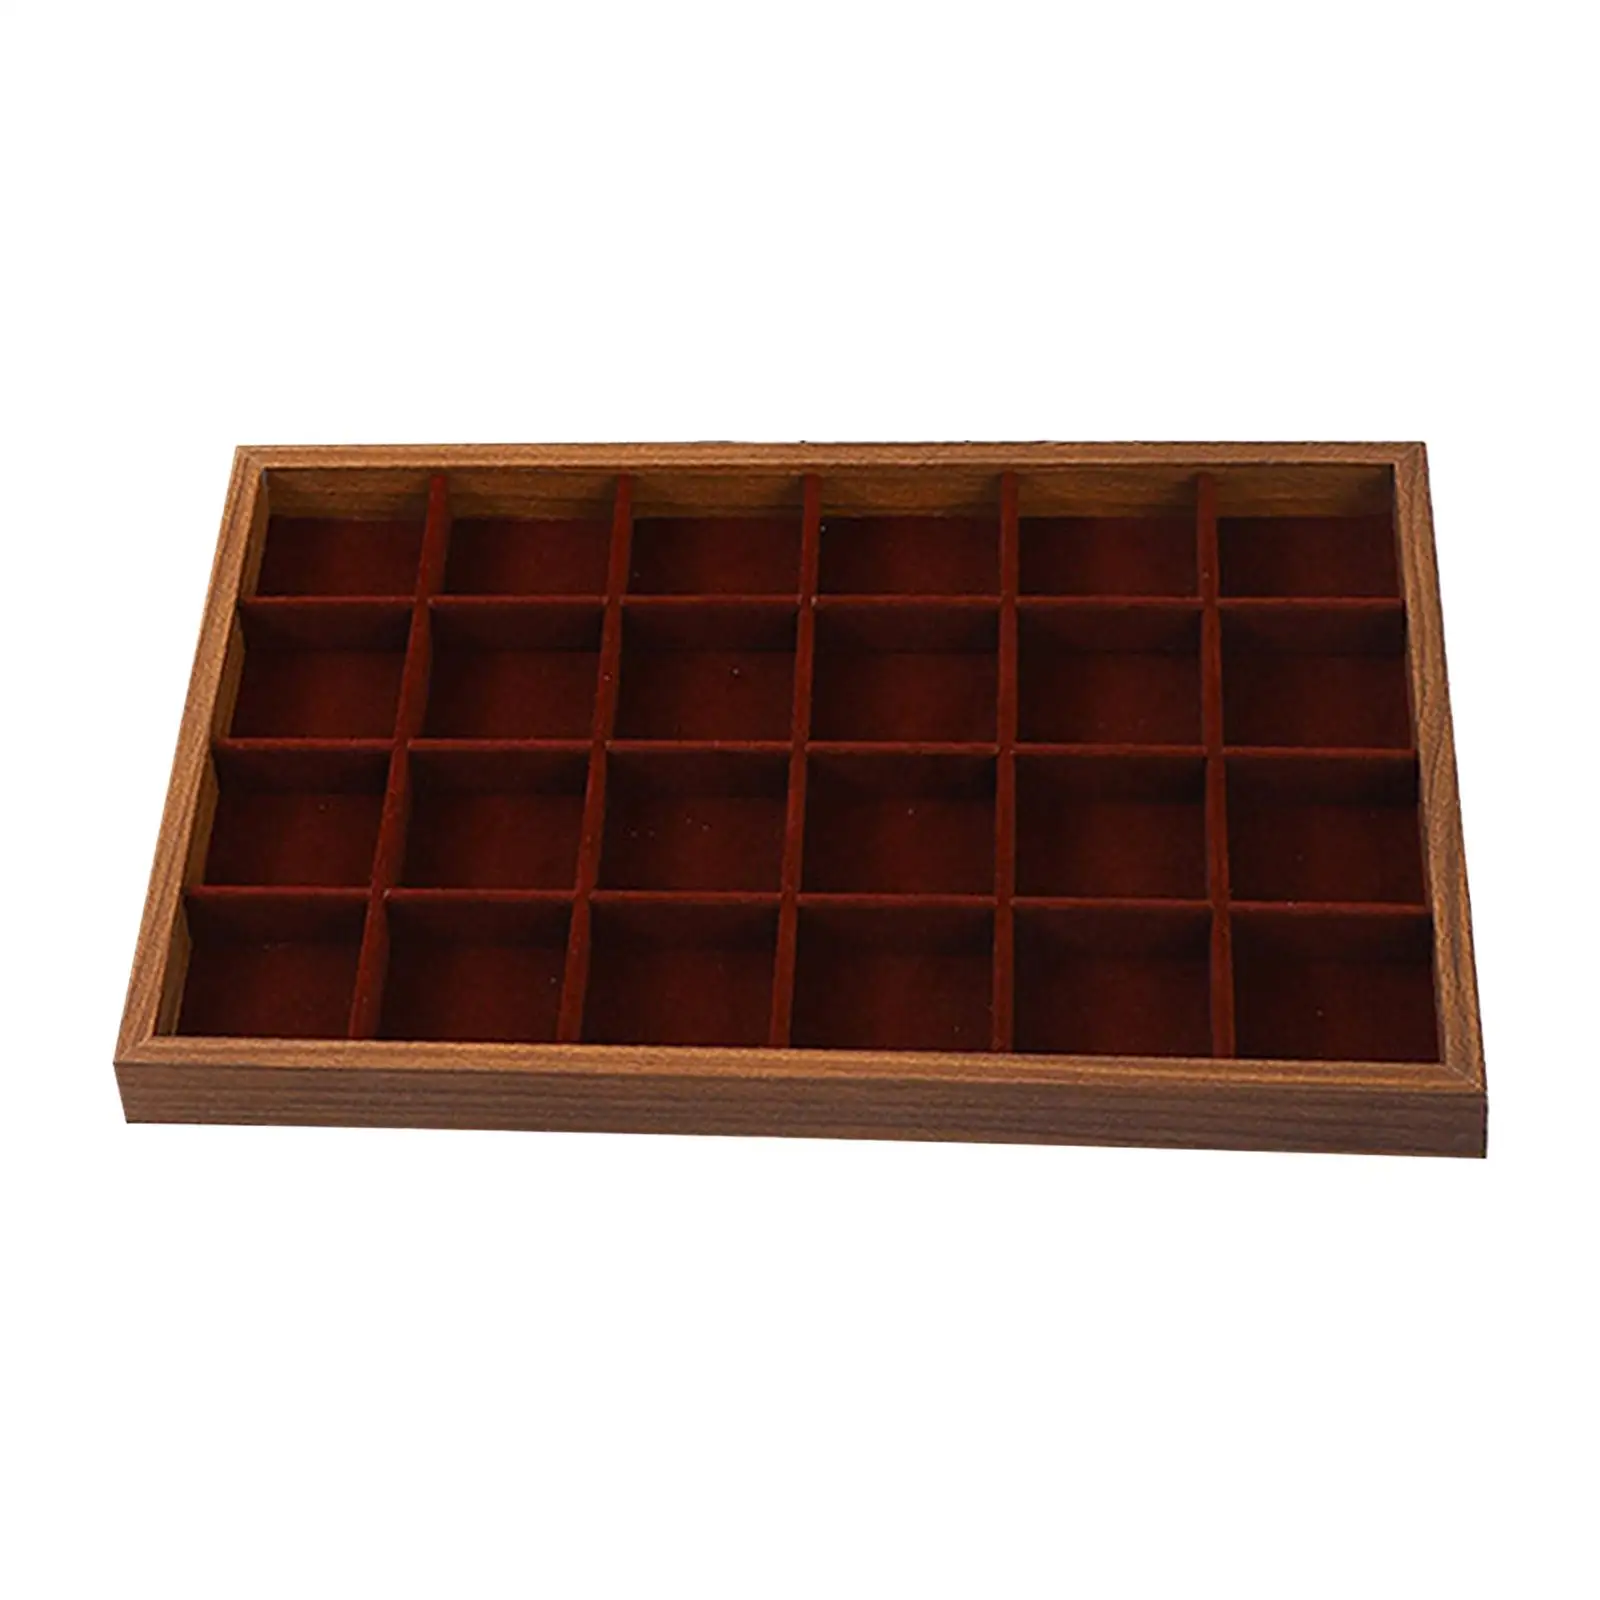 24 Grid Jewelry Drawer Organizer Tray Wood Jewelry Storage Box Case for Rings Necklaces Selling Show Earring Home Bedroom Drawer